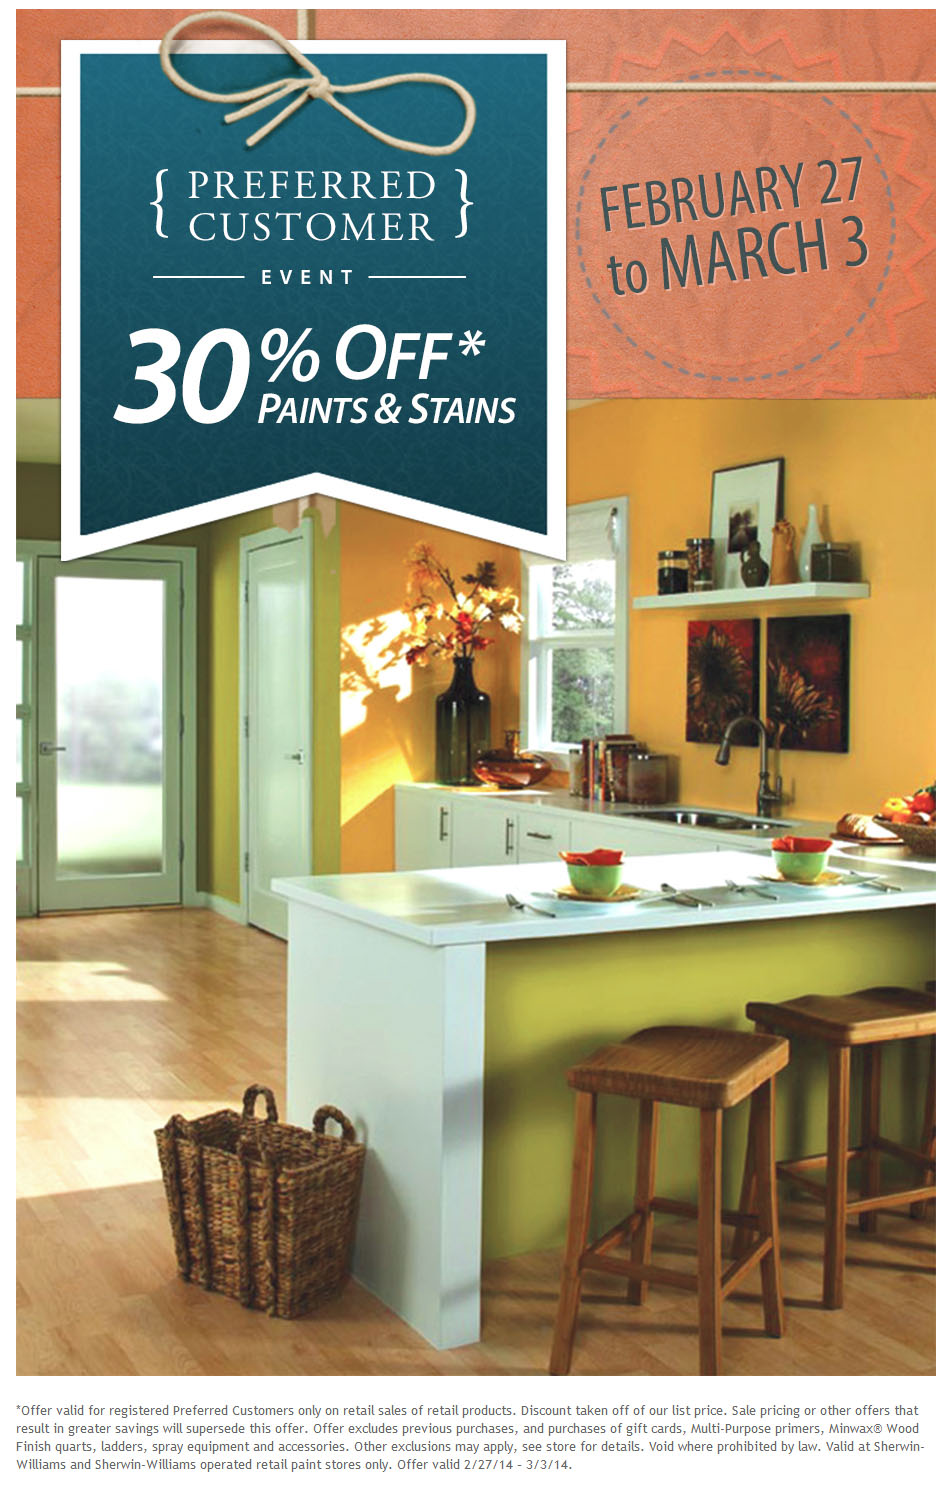 Sherwin Williams Promo Coupon Codes and Printable Coupons